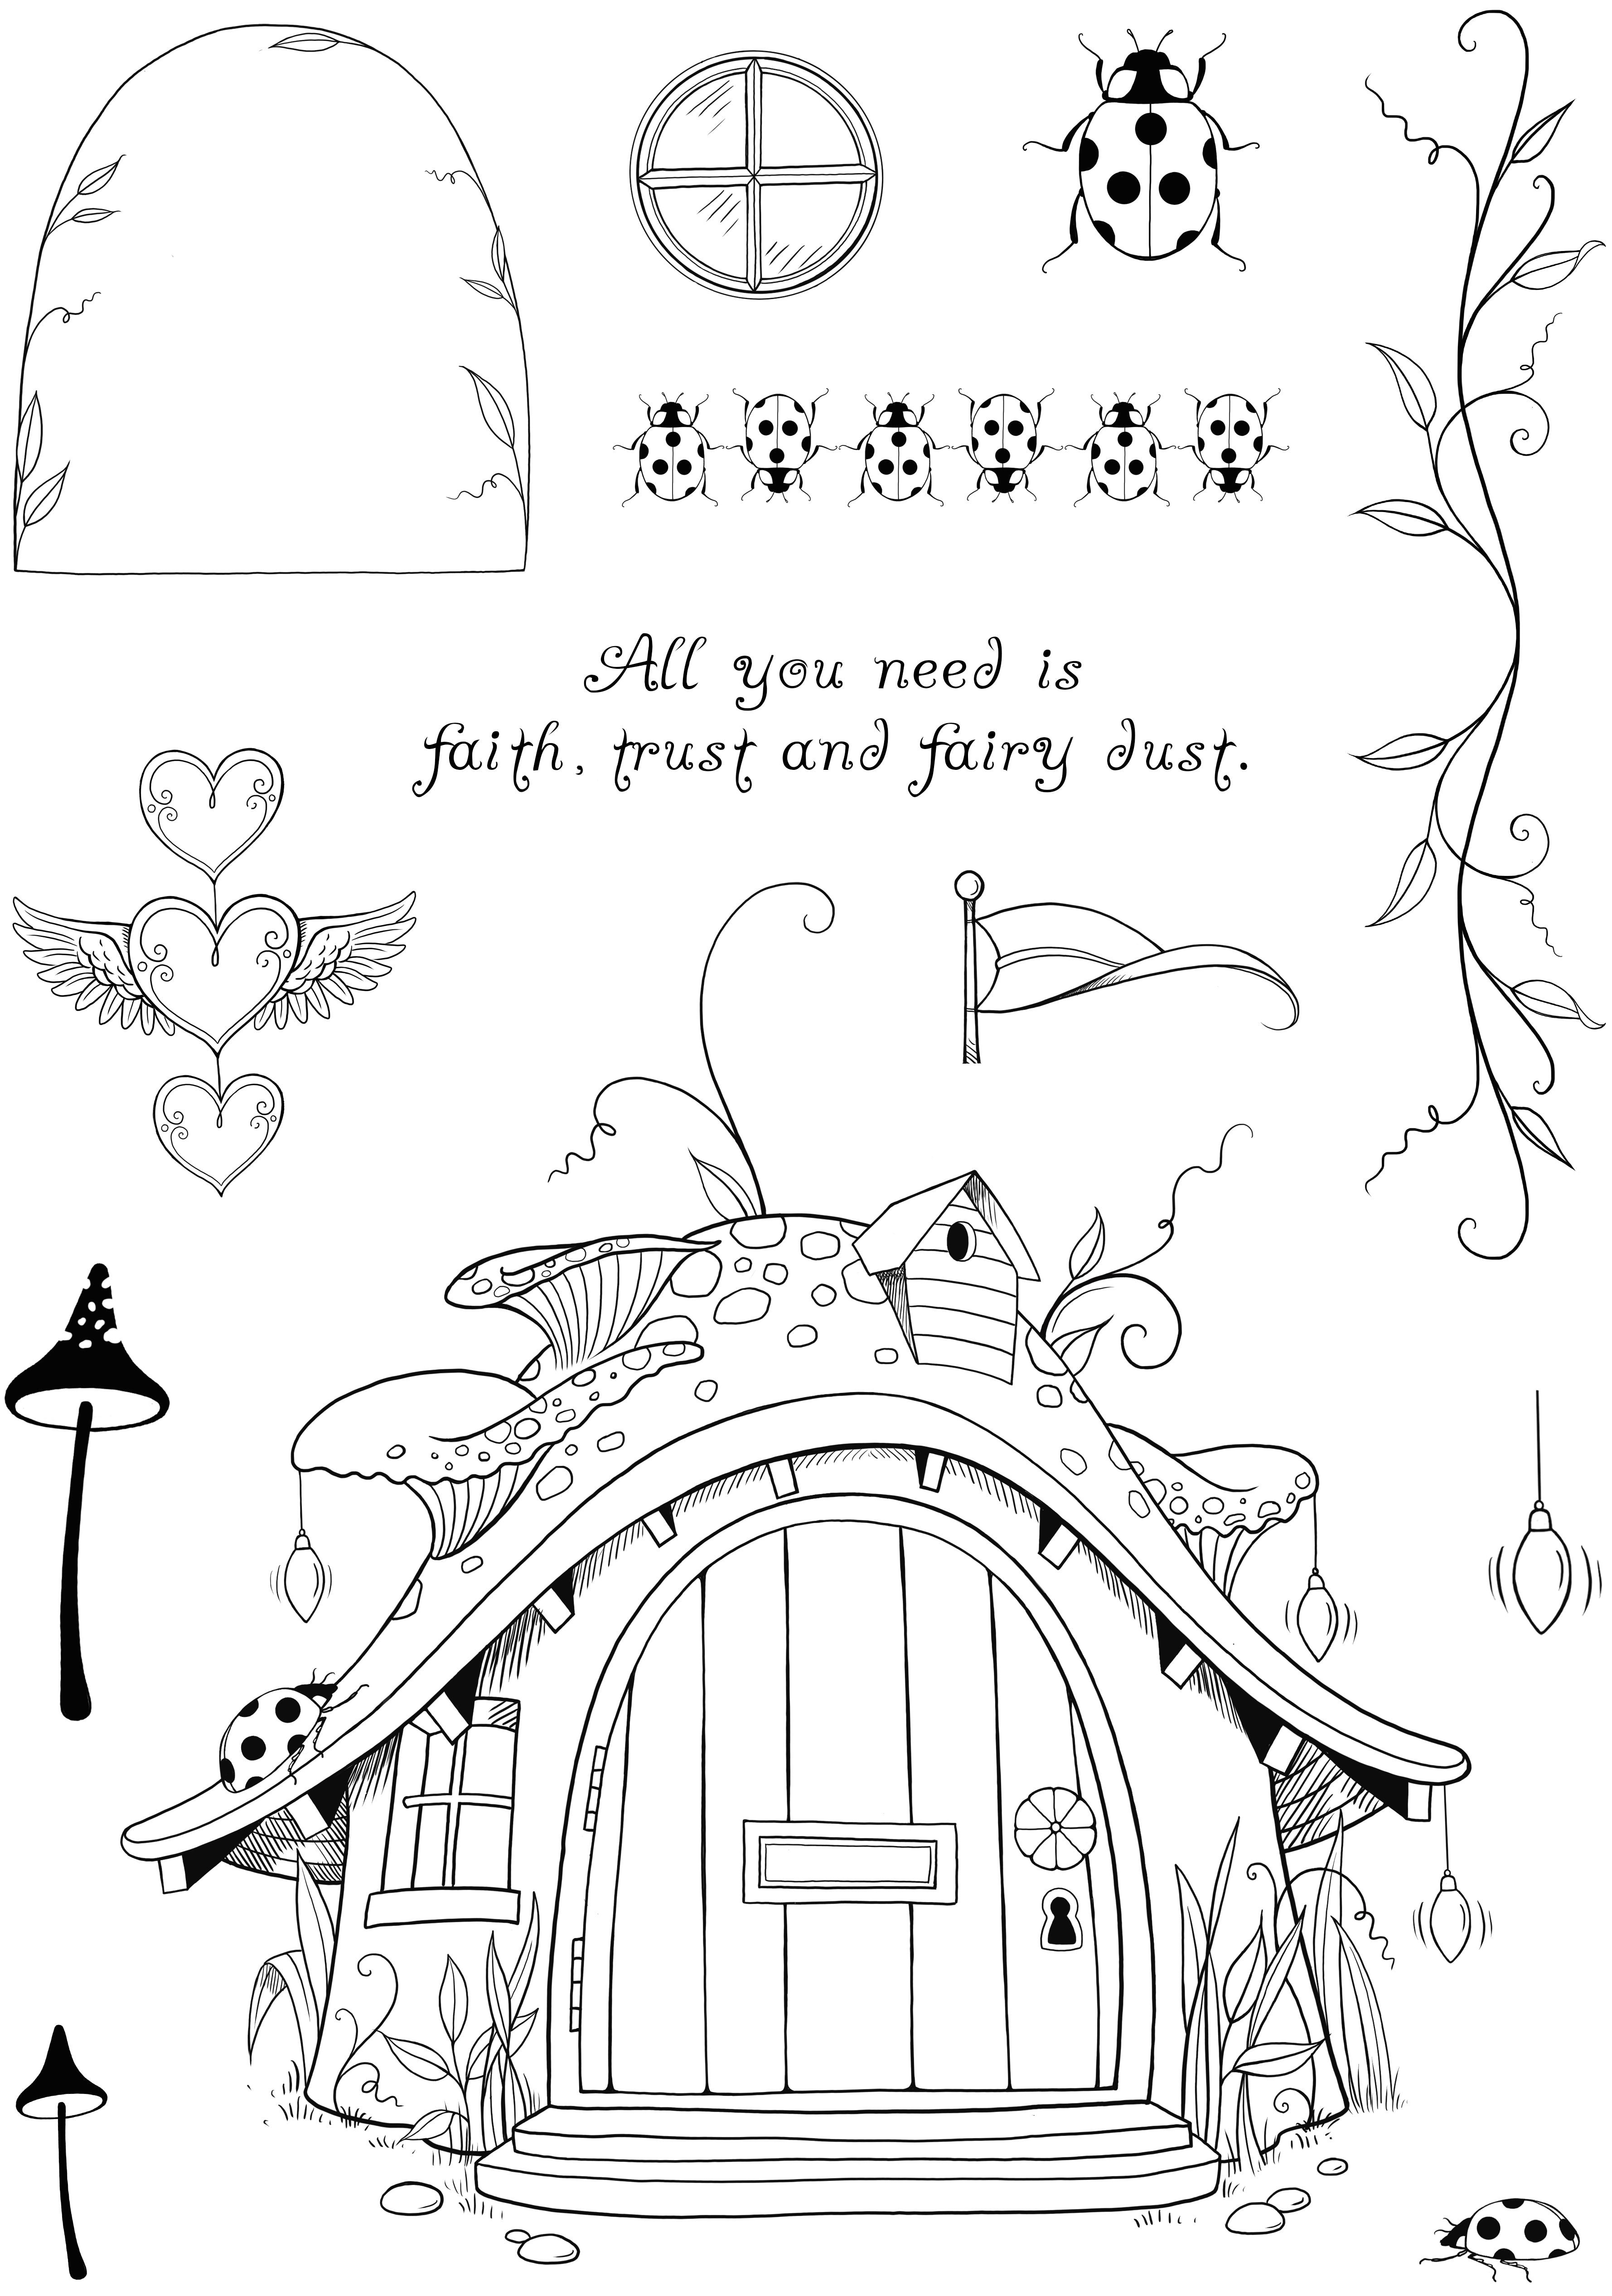 Pink Ink Designs A-Door-Able 6 in x 8 in Clear Stamp Set